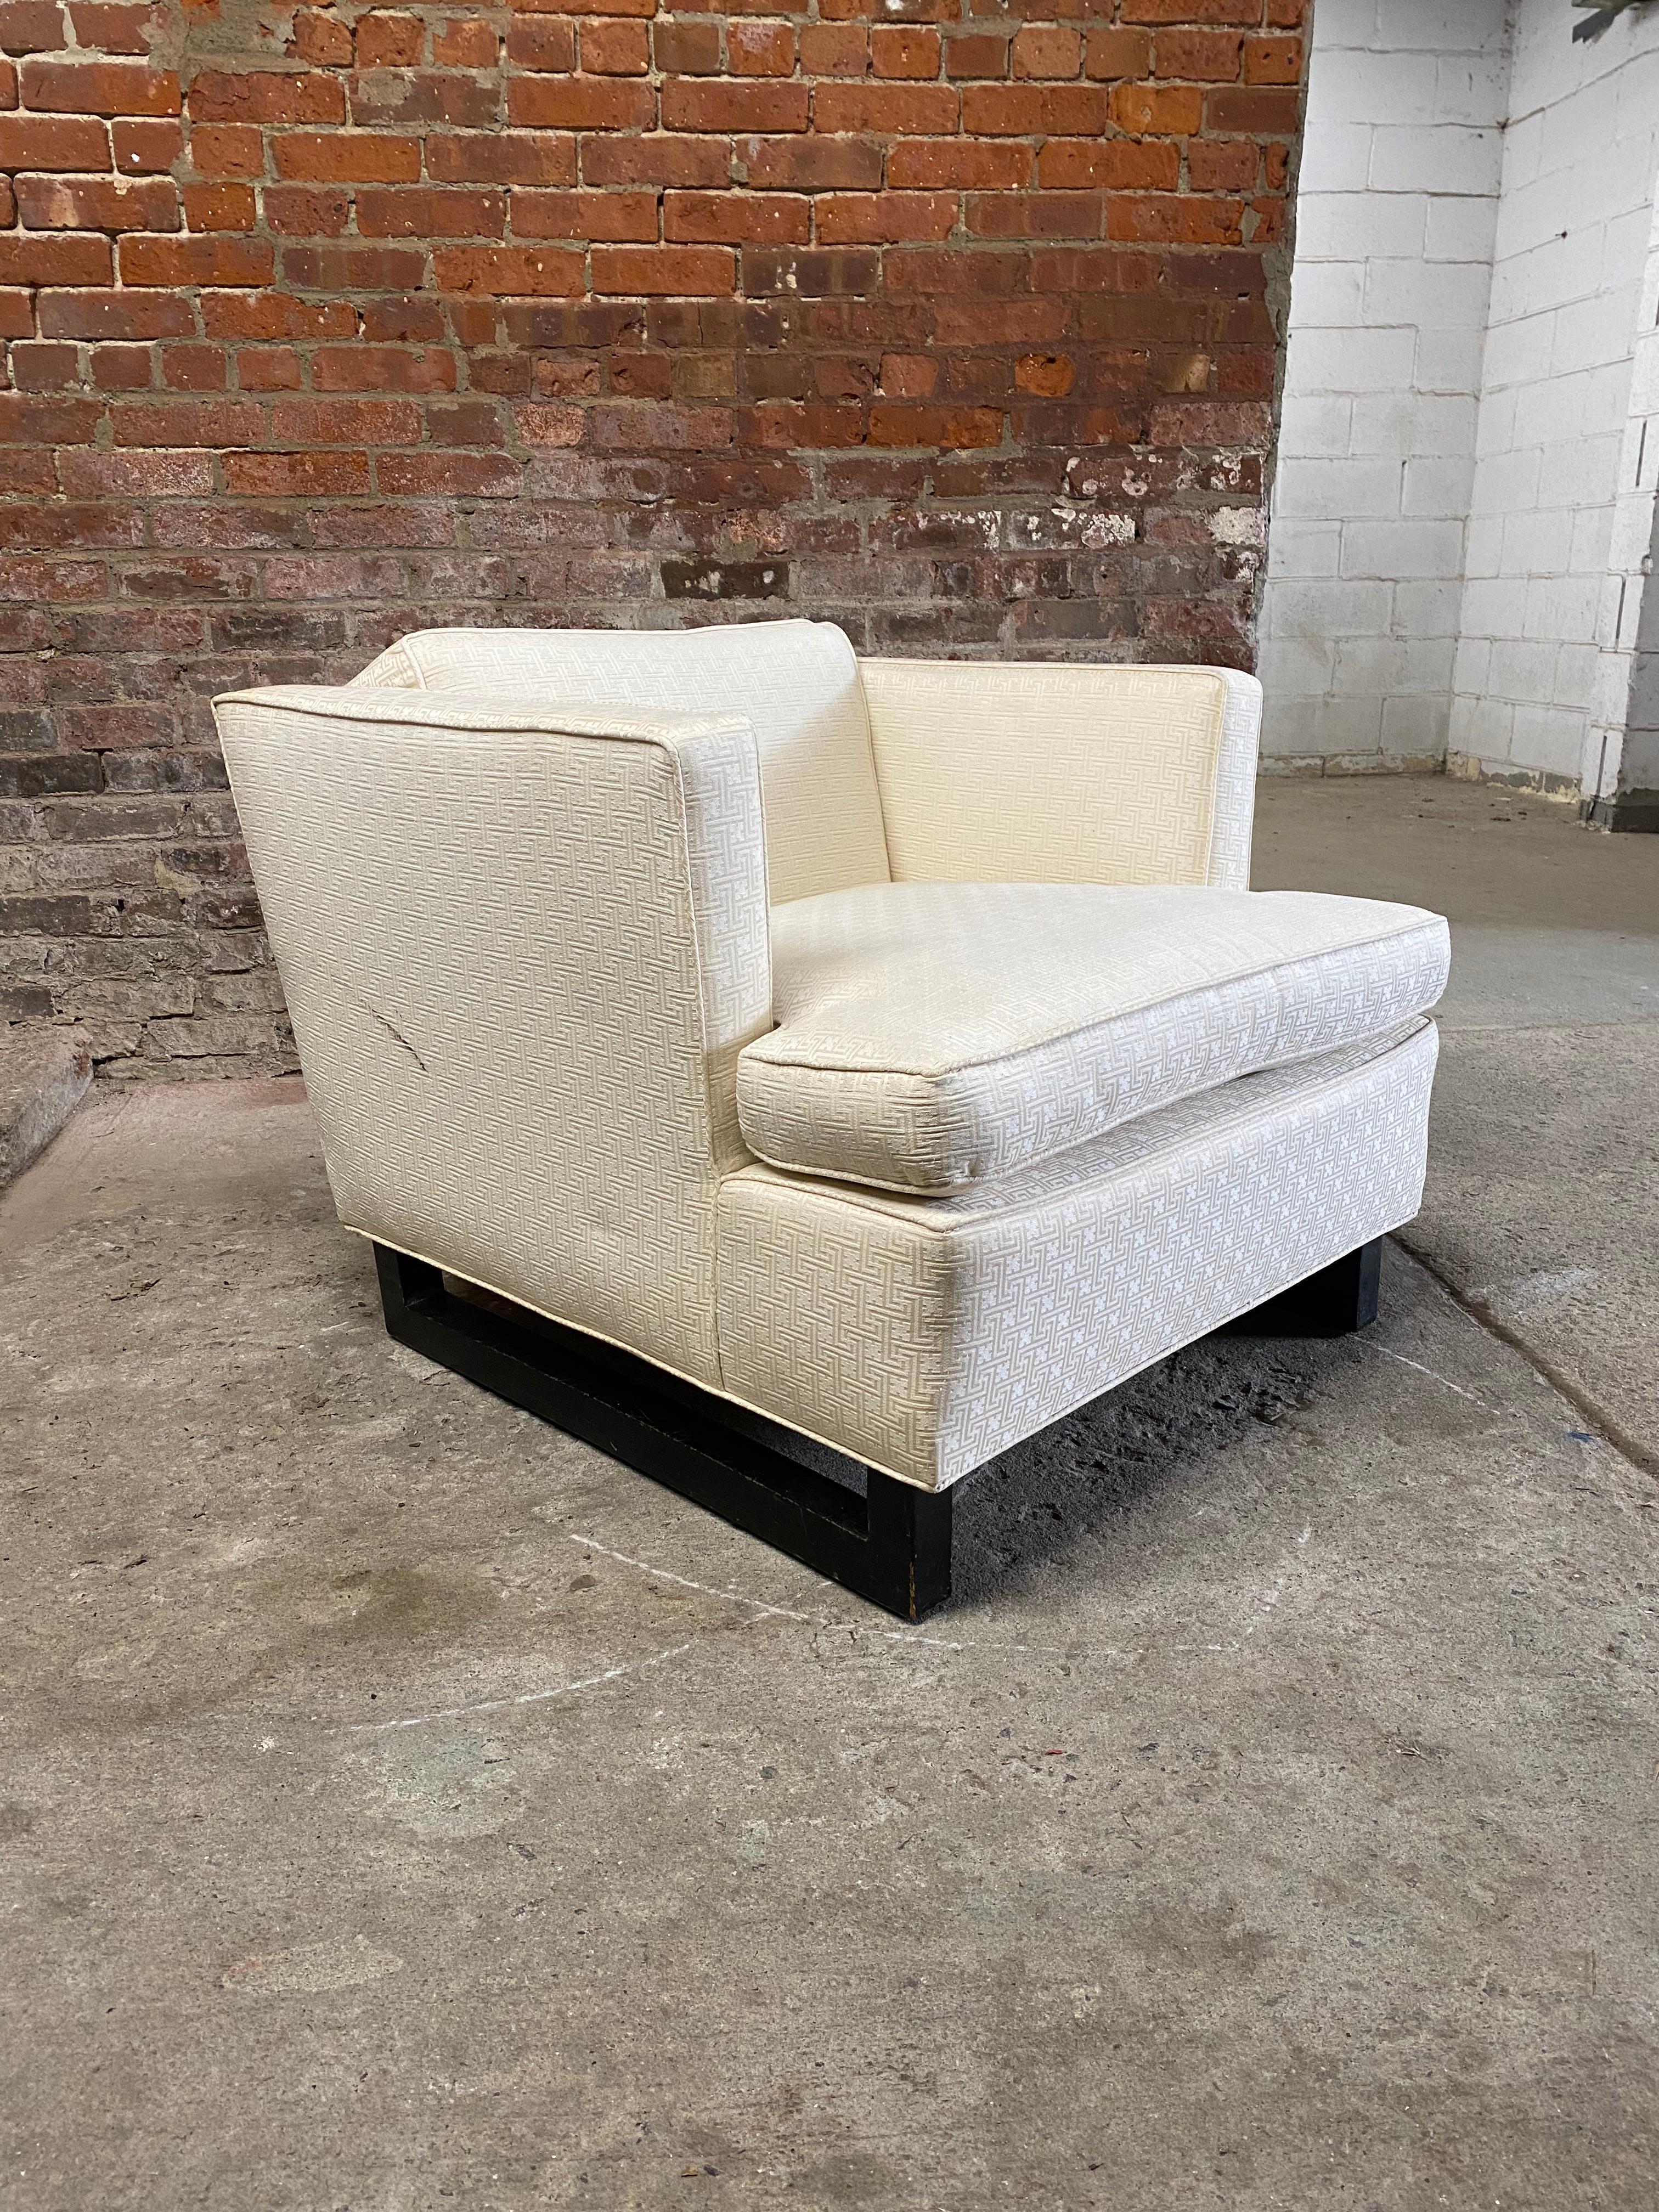 Wonderful transitional deep seat lounge chair with sleigh base. White Versace style upholstery with ebonized wood sleigh base. The lines and construction of this chair embody the elegance of the Art Deco and Hollywood Regency experience with the